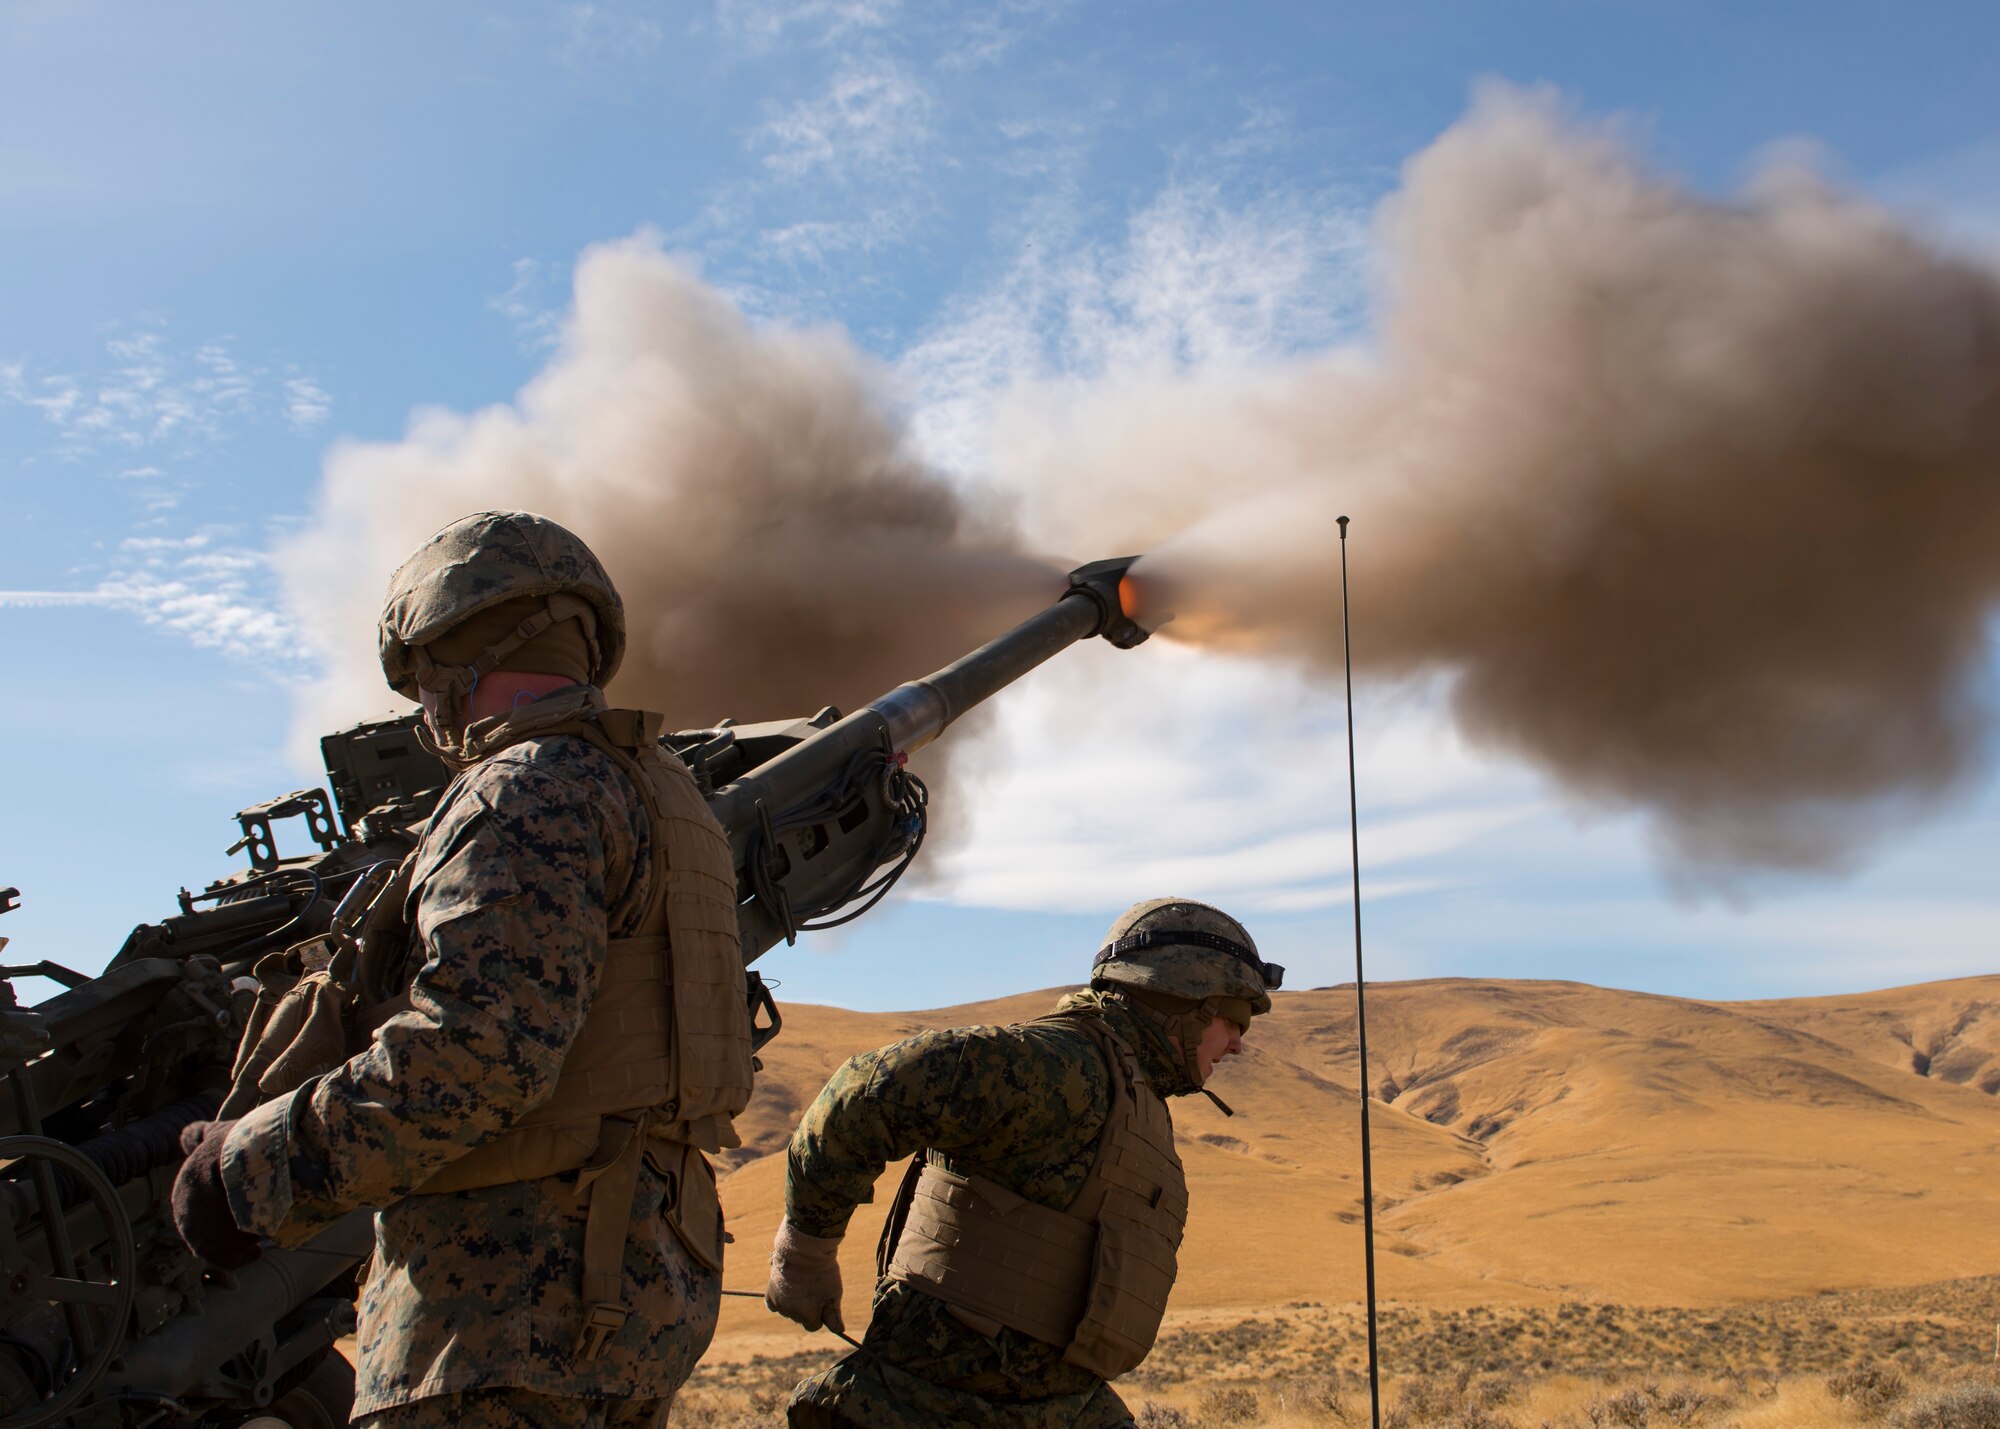 Marines of P Battery 5/14 fire a high explosive projectile downrange from a M777A2 howitzer weapon system during a live-fire training exercise at the Yakima Training Center, Washington, Oct 14, 2017. USMC crews can fire an M777A2 howitzer up to five rounds a minute under intense firing conditions and can provide a sustained rate of fire of two rounds a minute. (U.S. Air Force photo/Senior Airman Ryan Lackey)